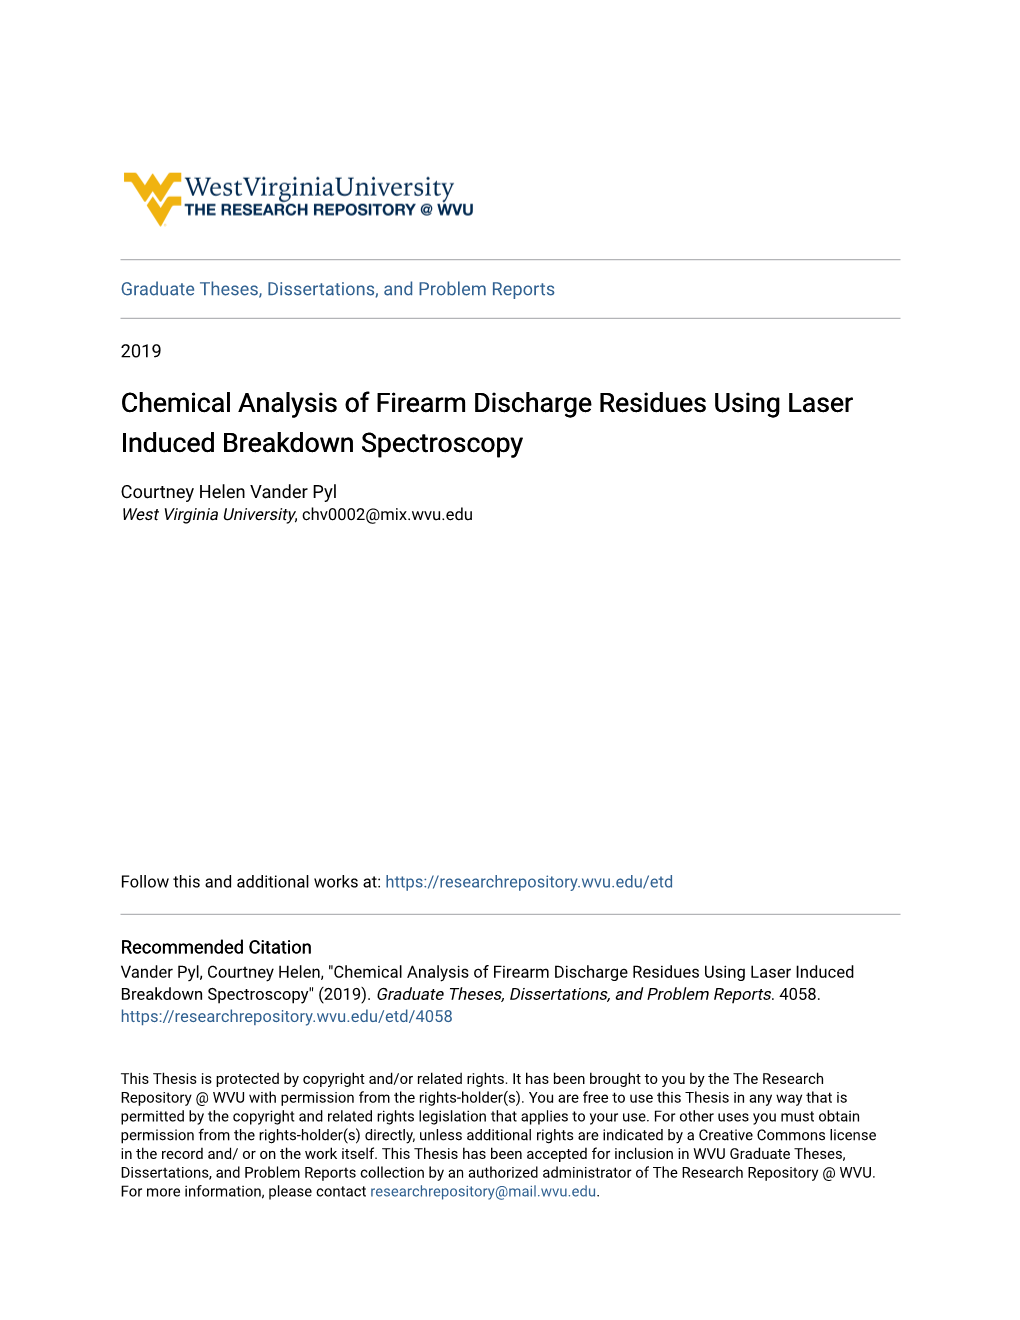 Chemical Analysis of Firearm Discharge Residues Using Laser Induced Breakdown Spectroscopy